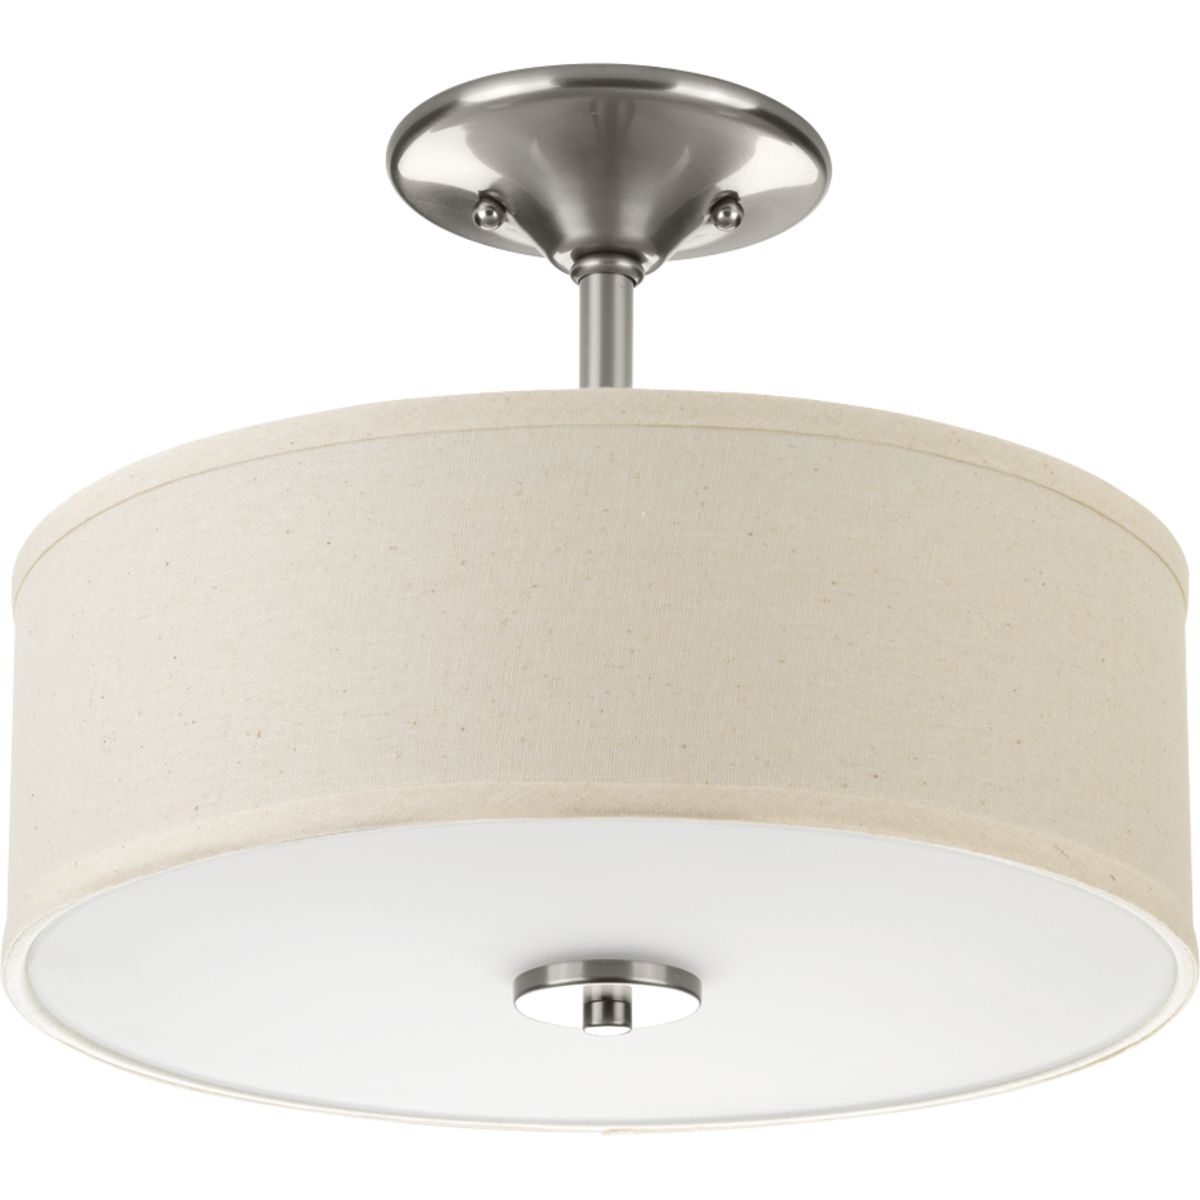 Inspire Collection One-Light 13" LED Semi-Flush Mount - Damp Location Listed - P3683-0930K9